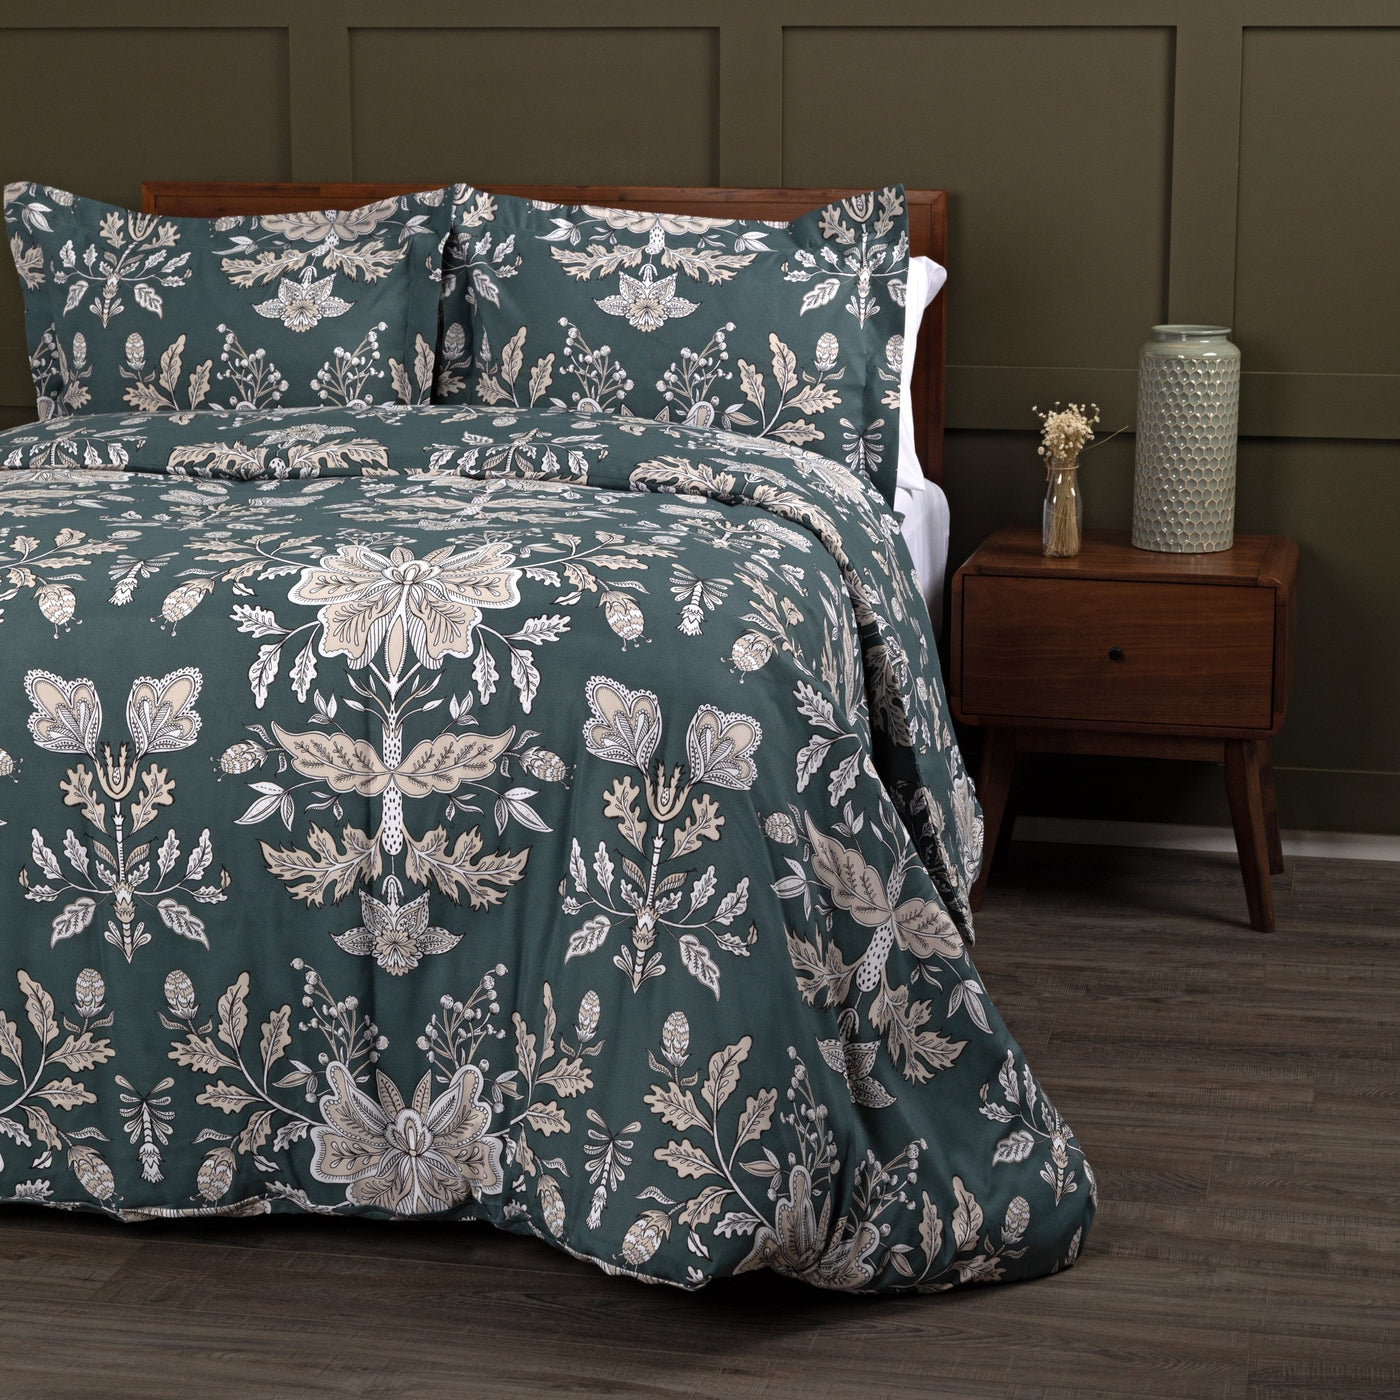 Side View of Vintage Garden Duvet Cover Set in Smokey Blue#color_vintage-smokey-blue